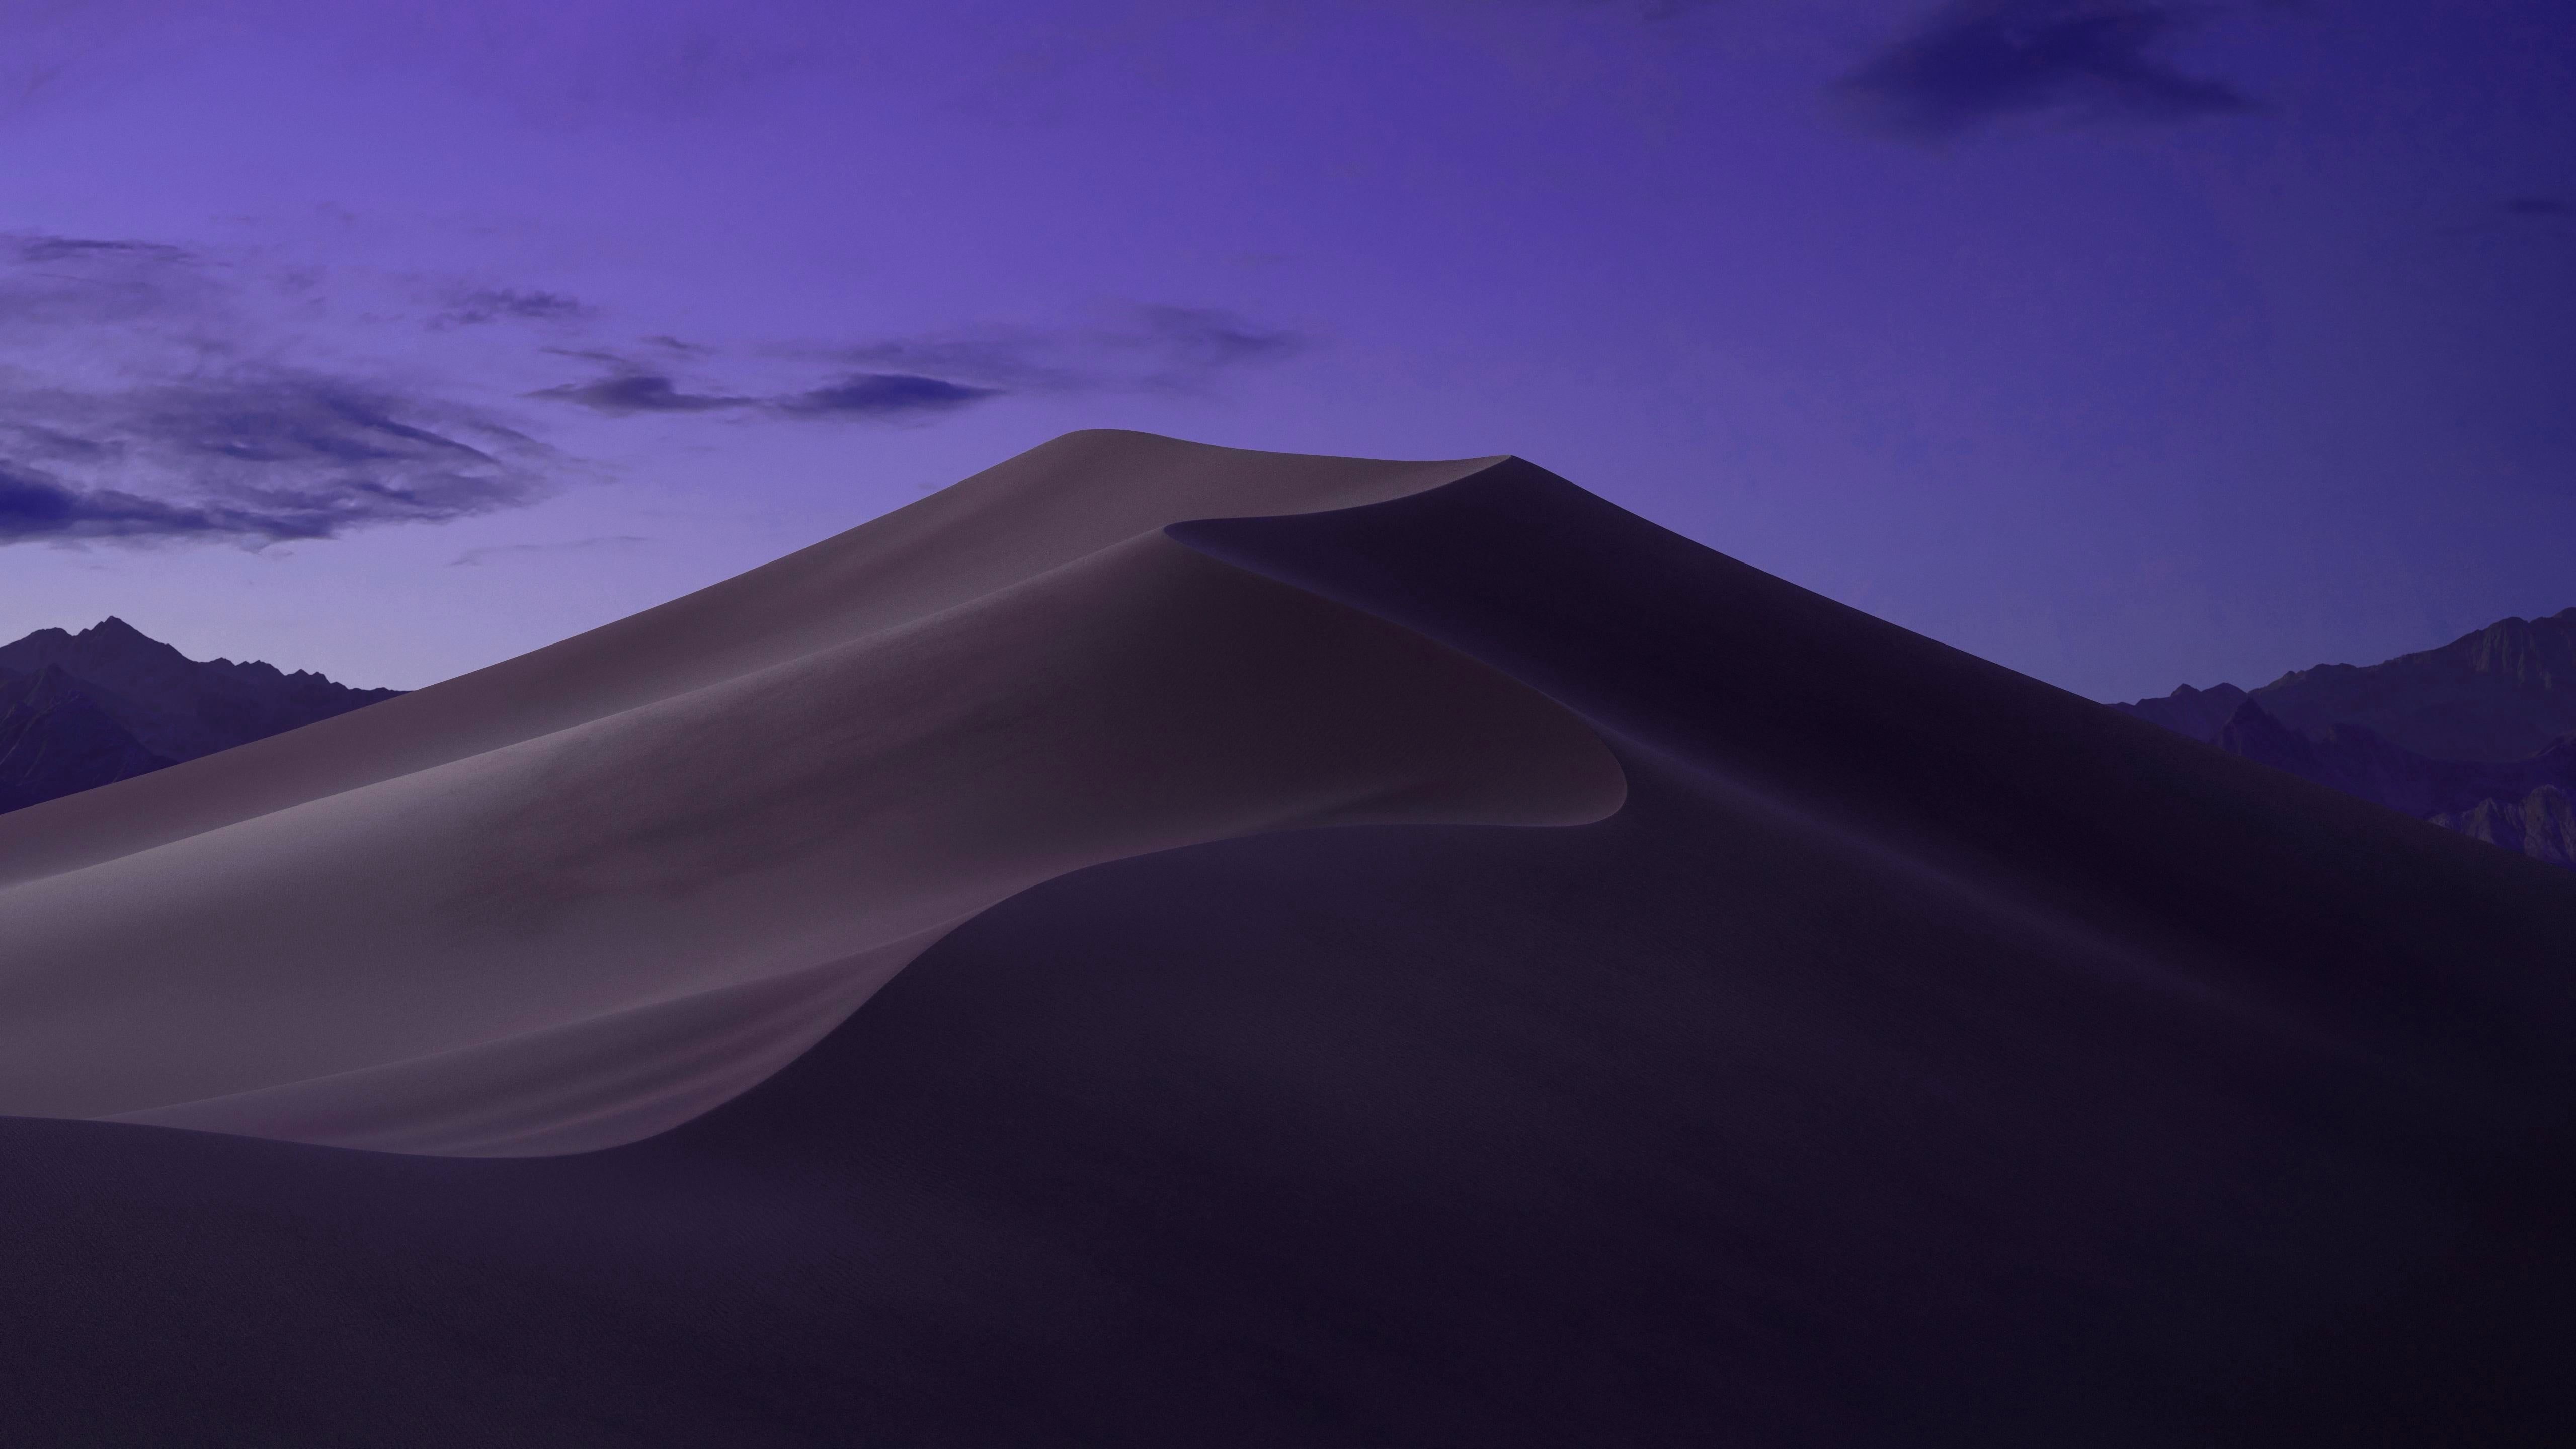 A More Purple Ish Version Of The Mac OS Mojave 4K Wallpaper. Mac Wallpaper, Mac Wallpaper Desktop, Mac Os Wallpaper